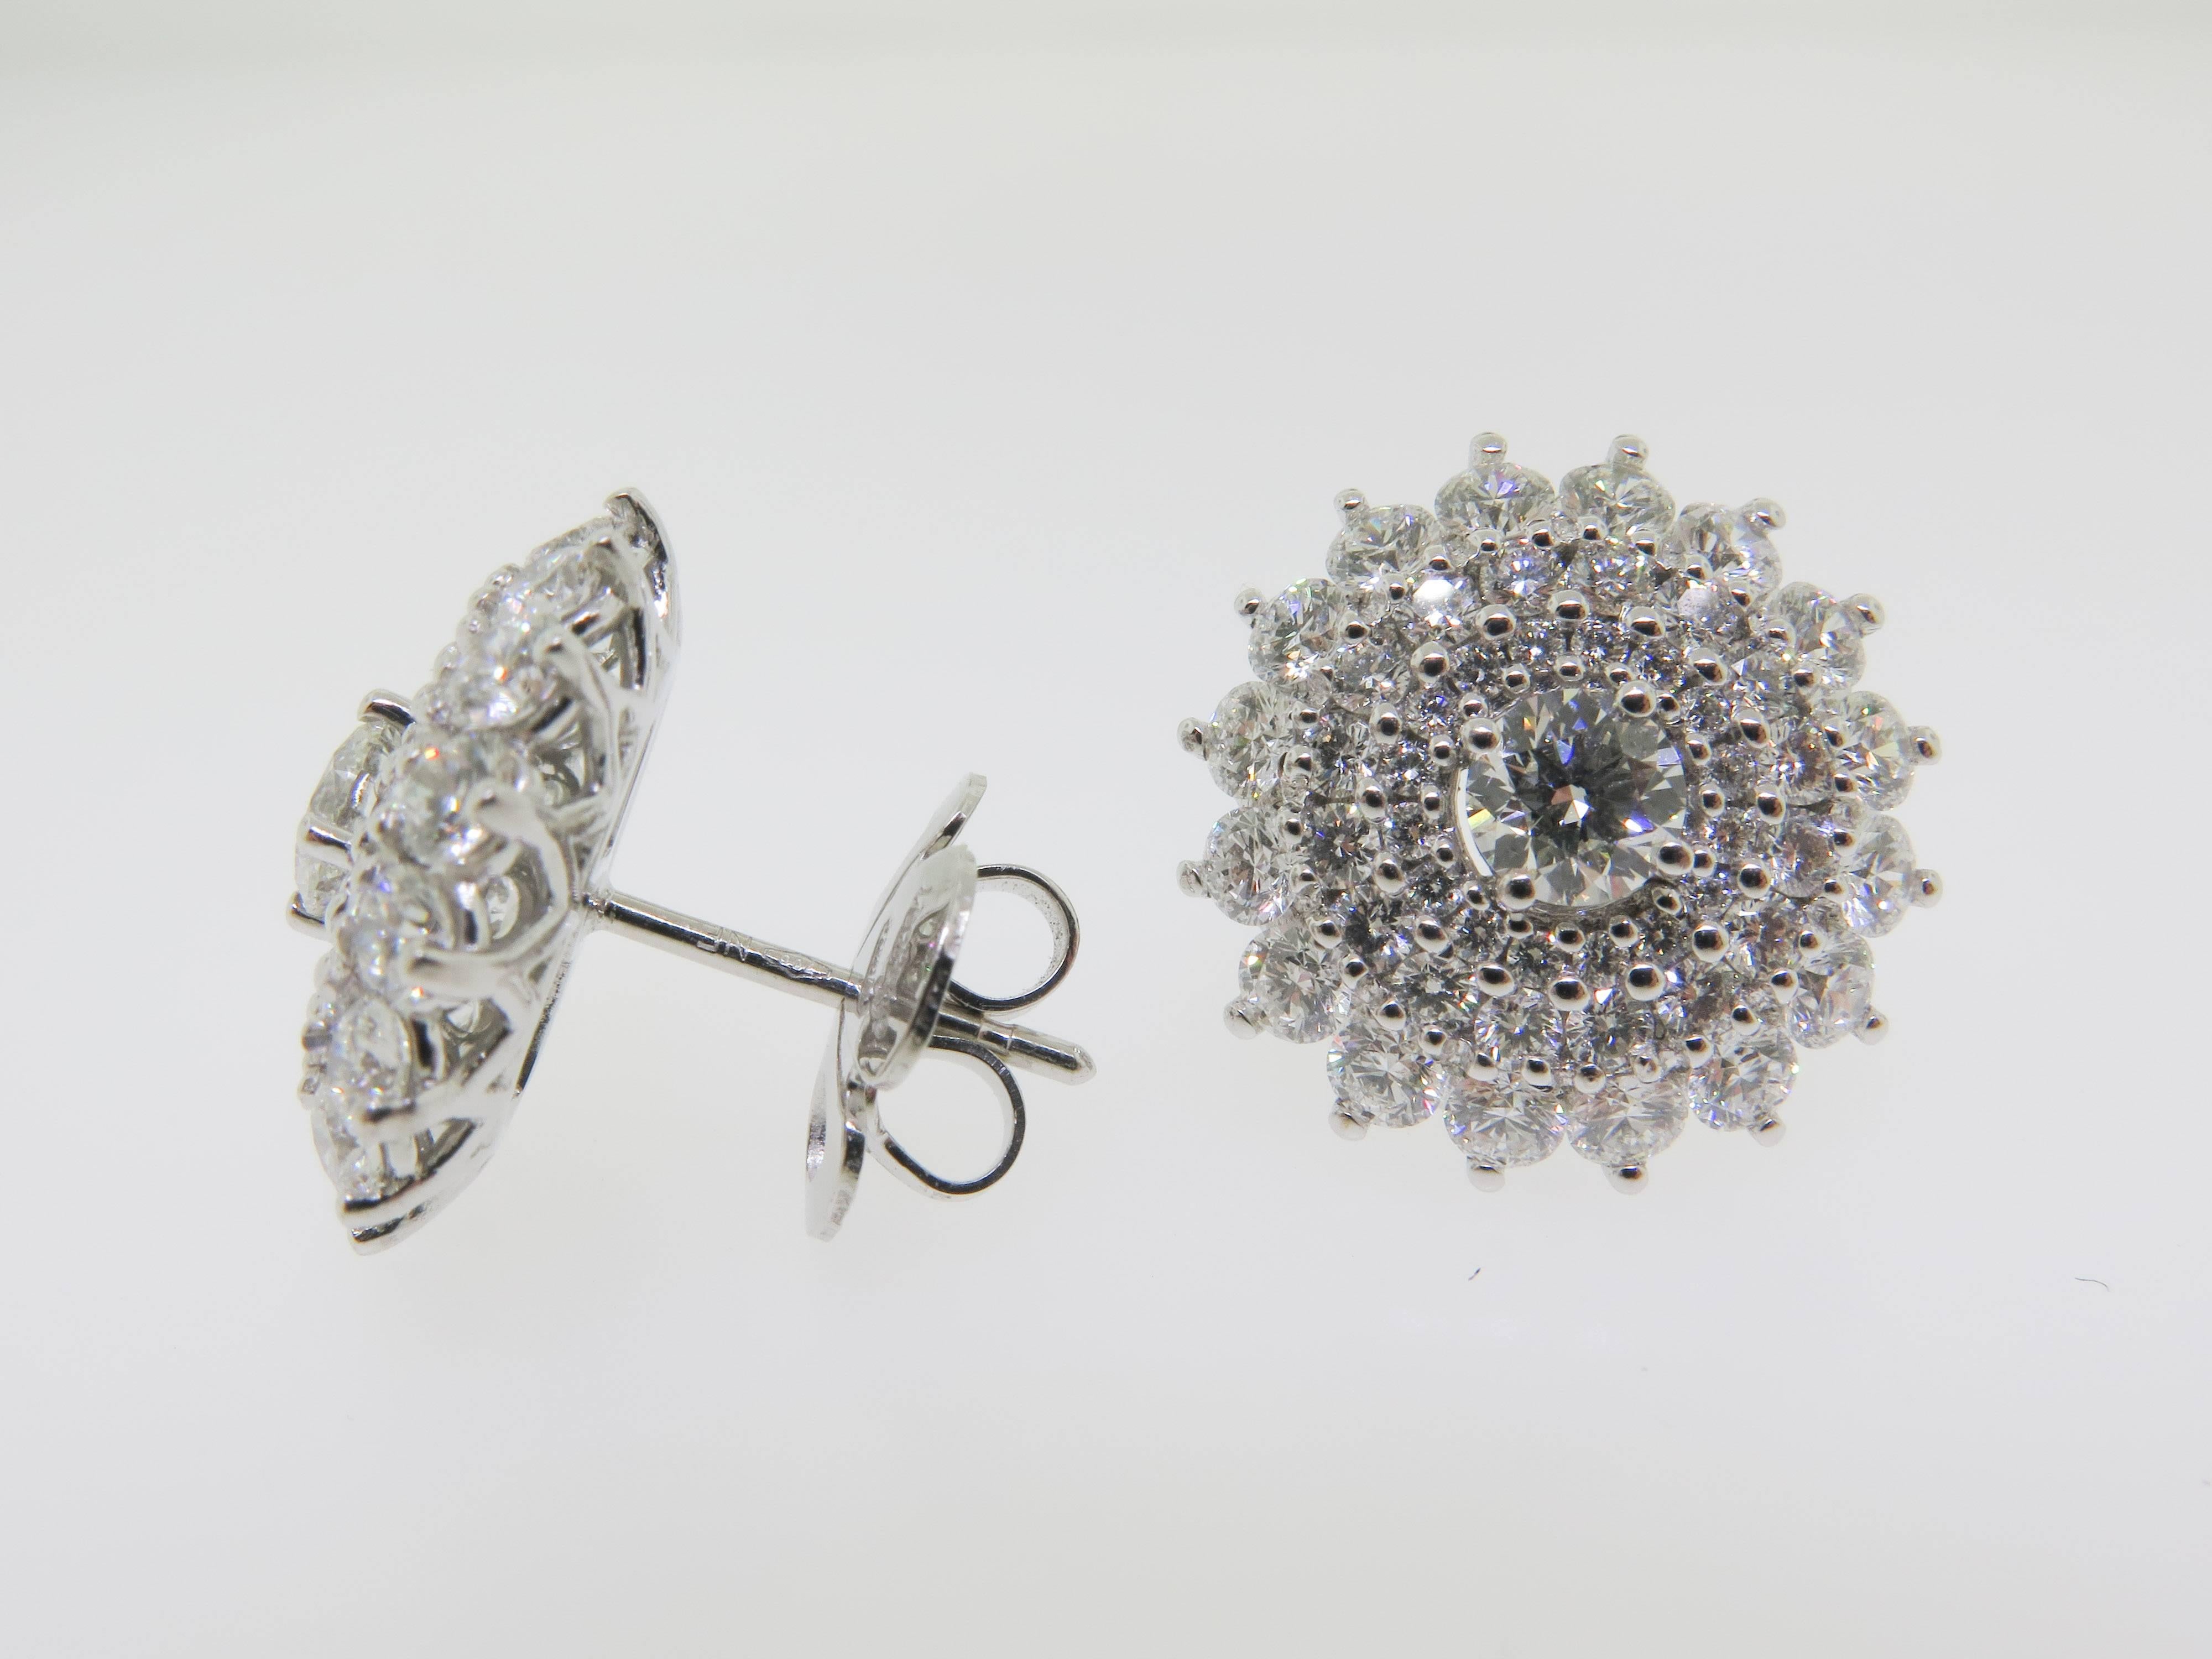 These gorgeous pair of earrings, set and hand crafted in 18K white gold. Bright white round cut diamonds, look brilliant in these cluster earrings. Approximate total weight 4.58 carats. These are earrings that do not require a special occasion.